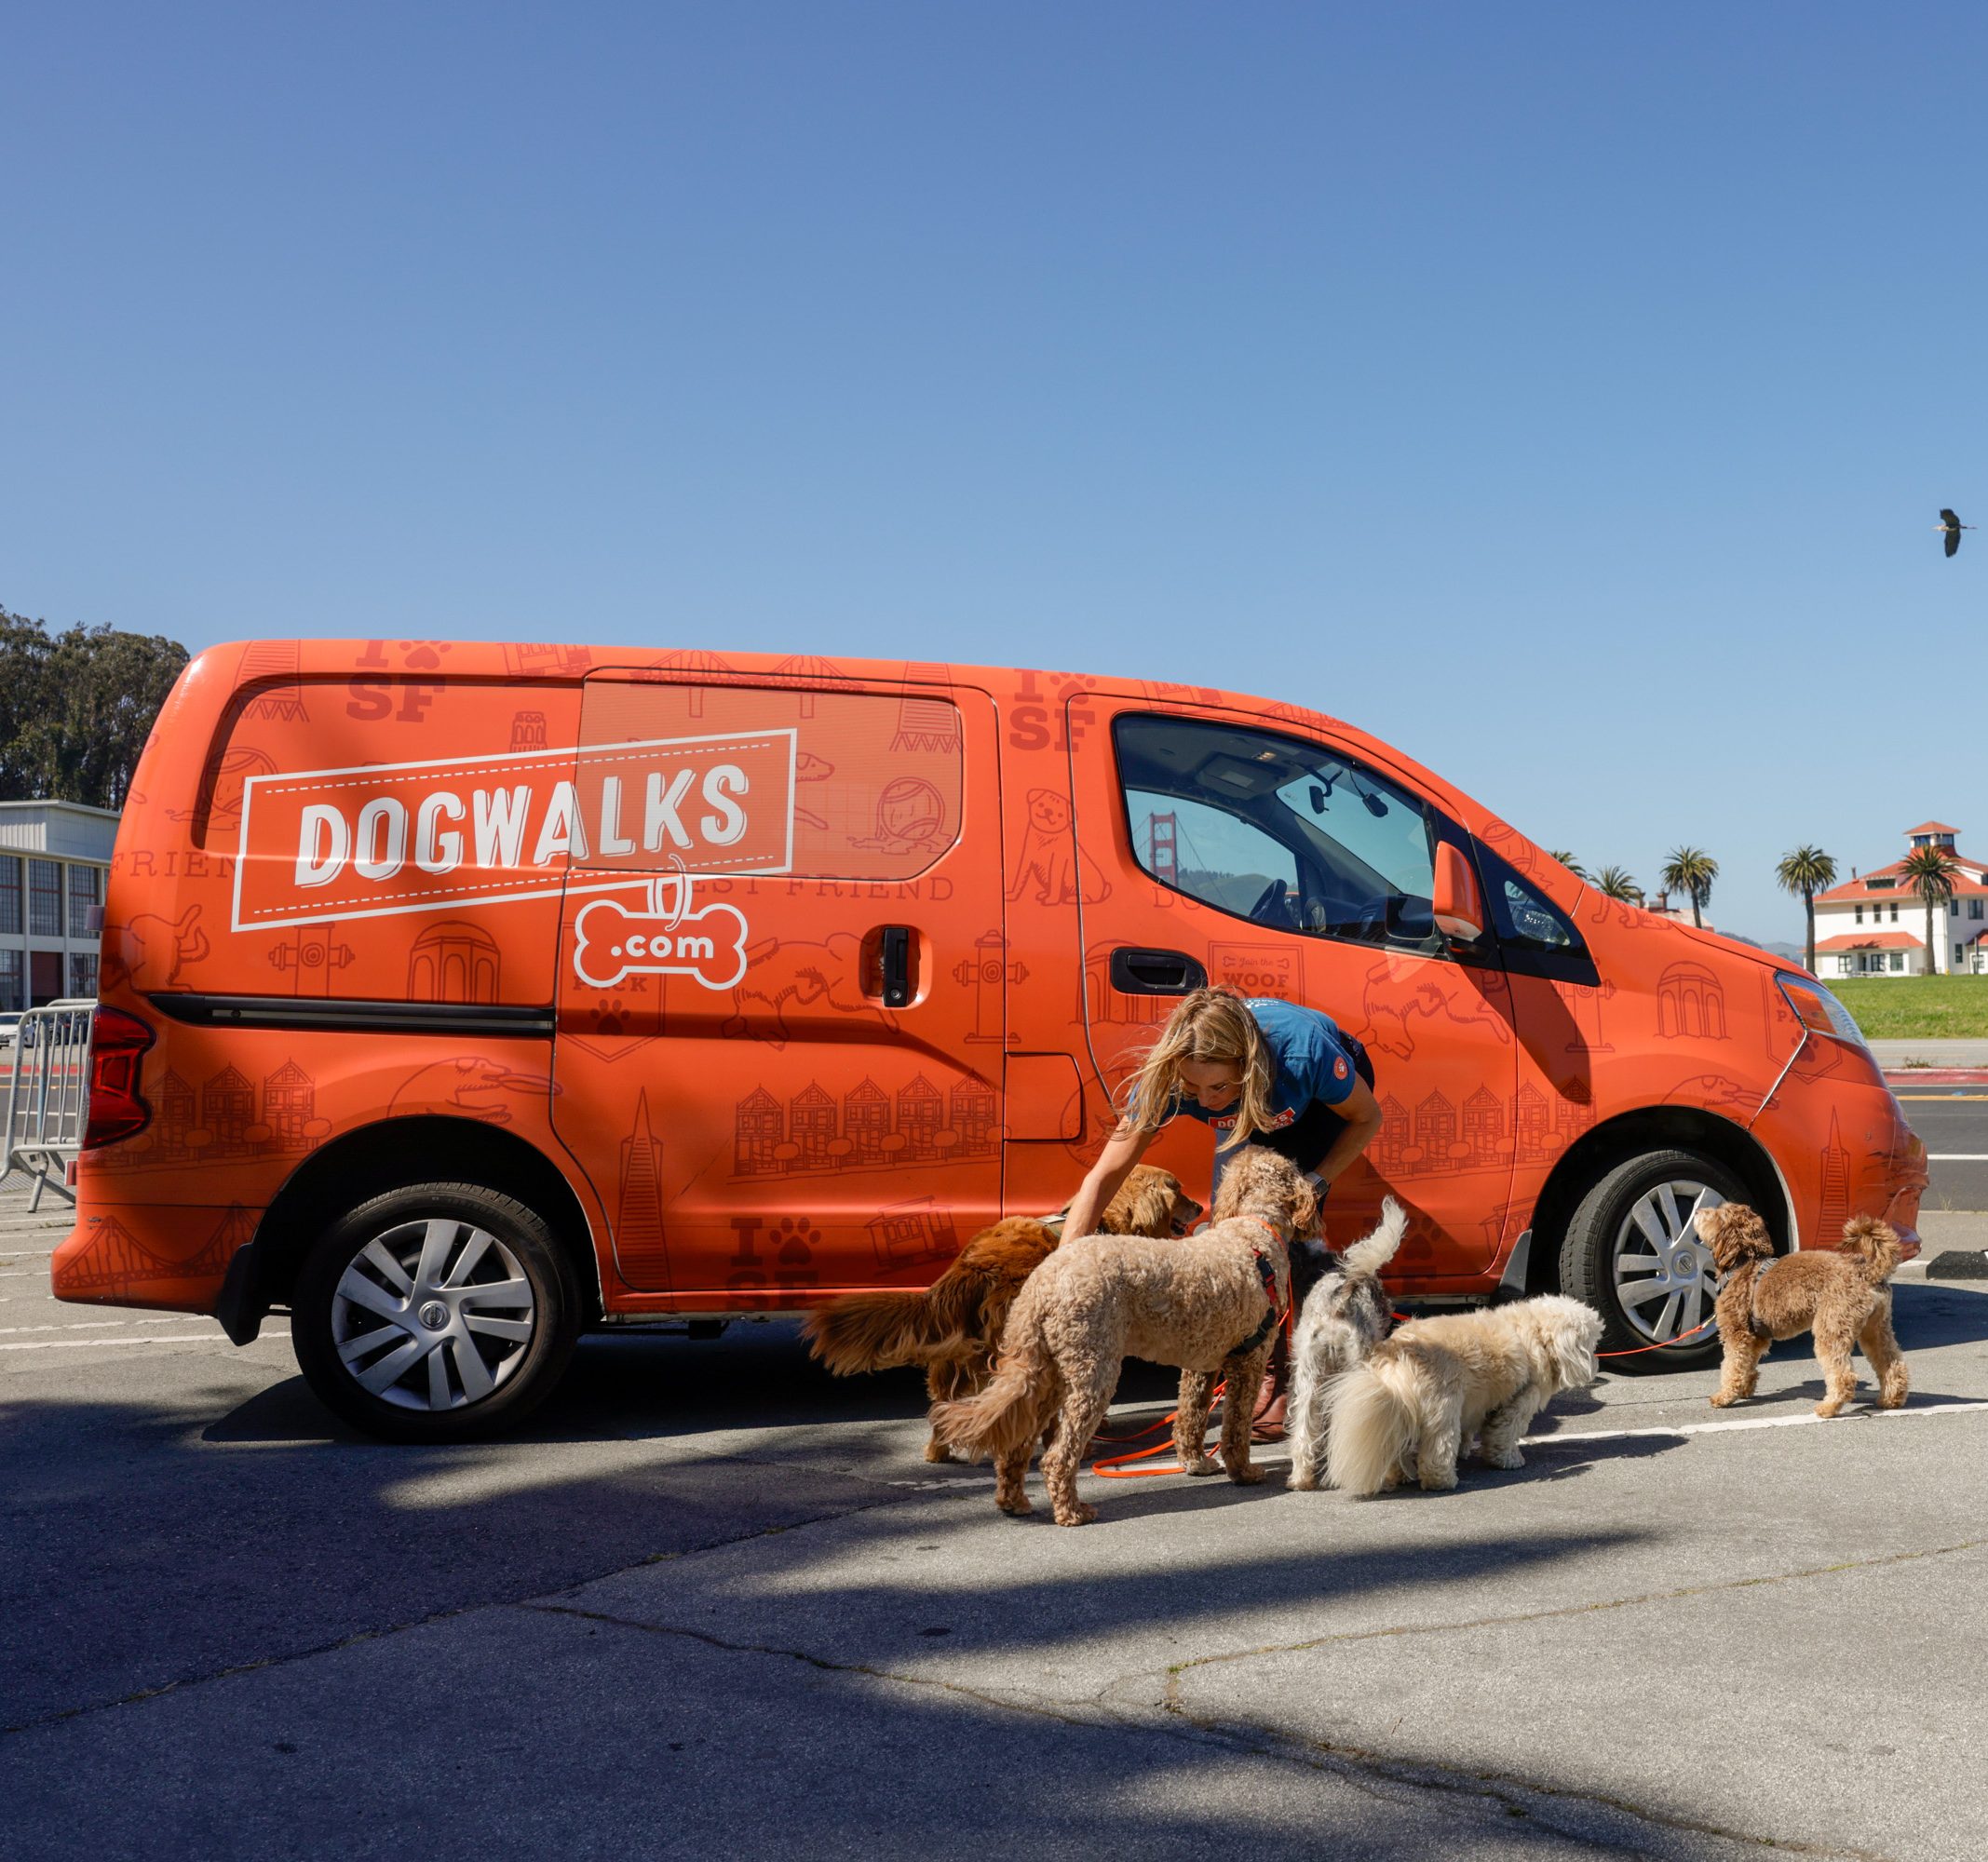 A person attends to multiple dogs near an orange van with &quot;DOG WALKS&quot; branded on it, parked by a sunny road.